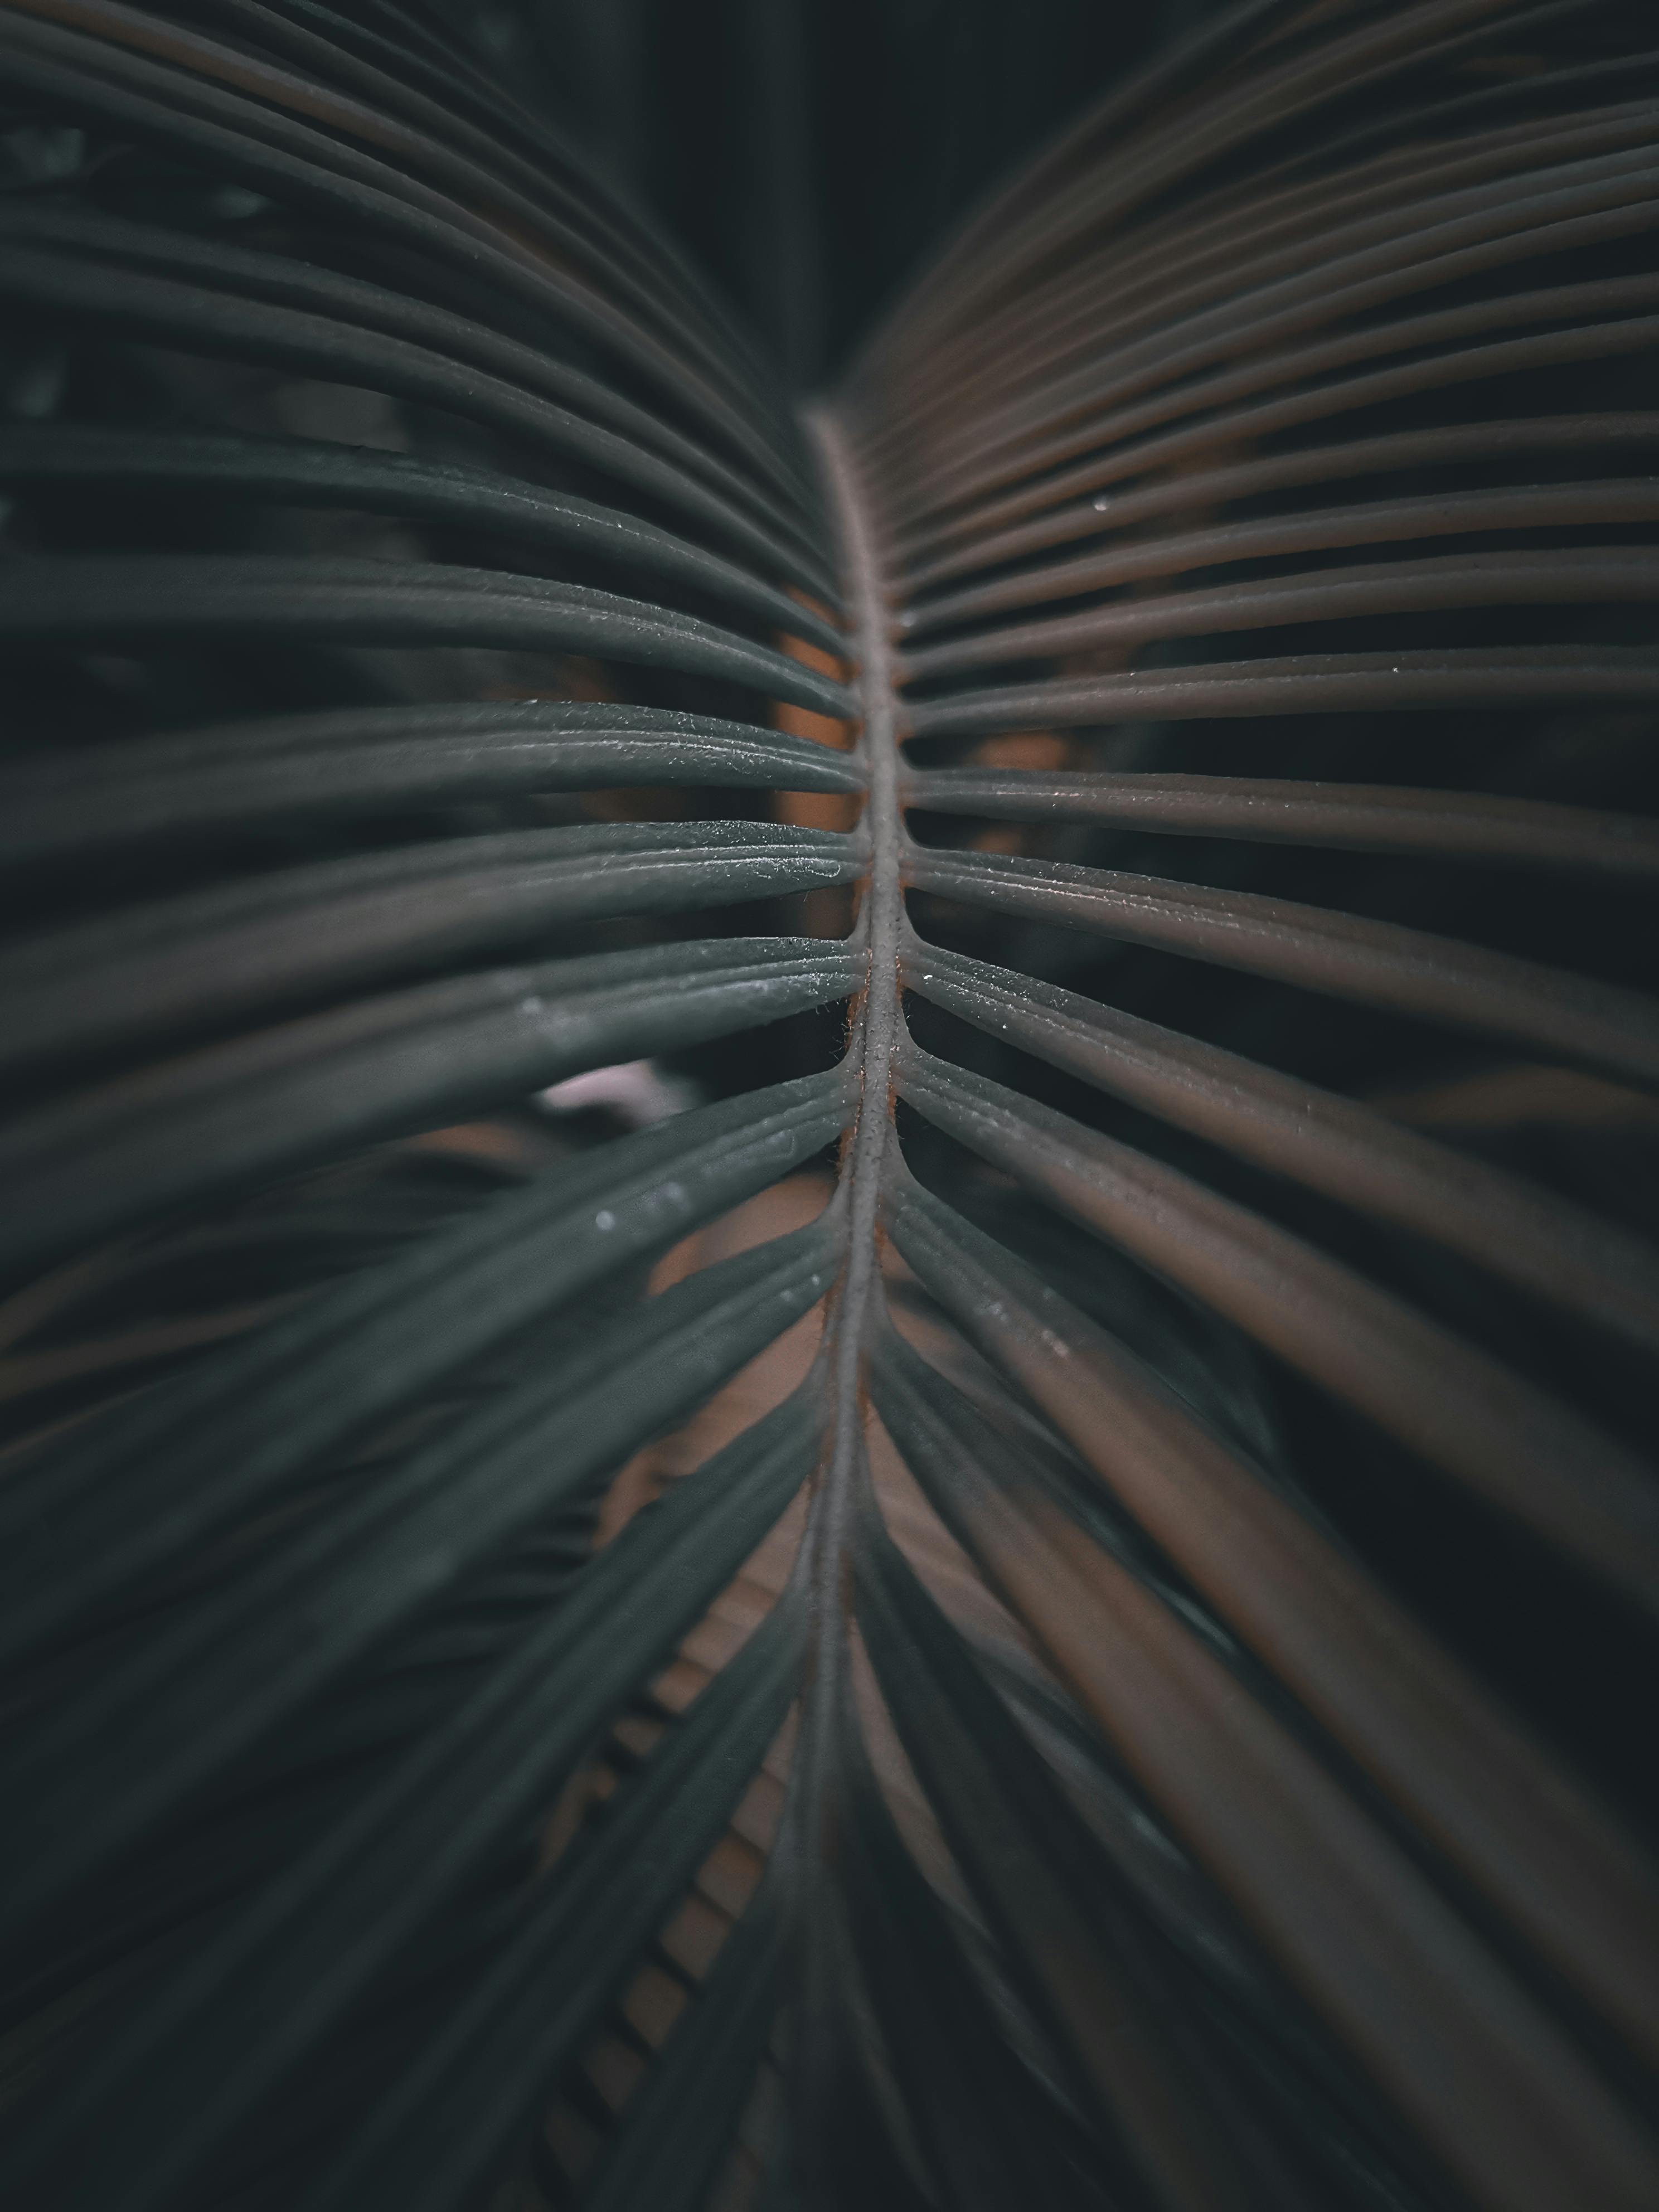 Fern leaf growing in forest at night · Free Stock Photo